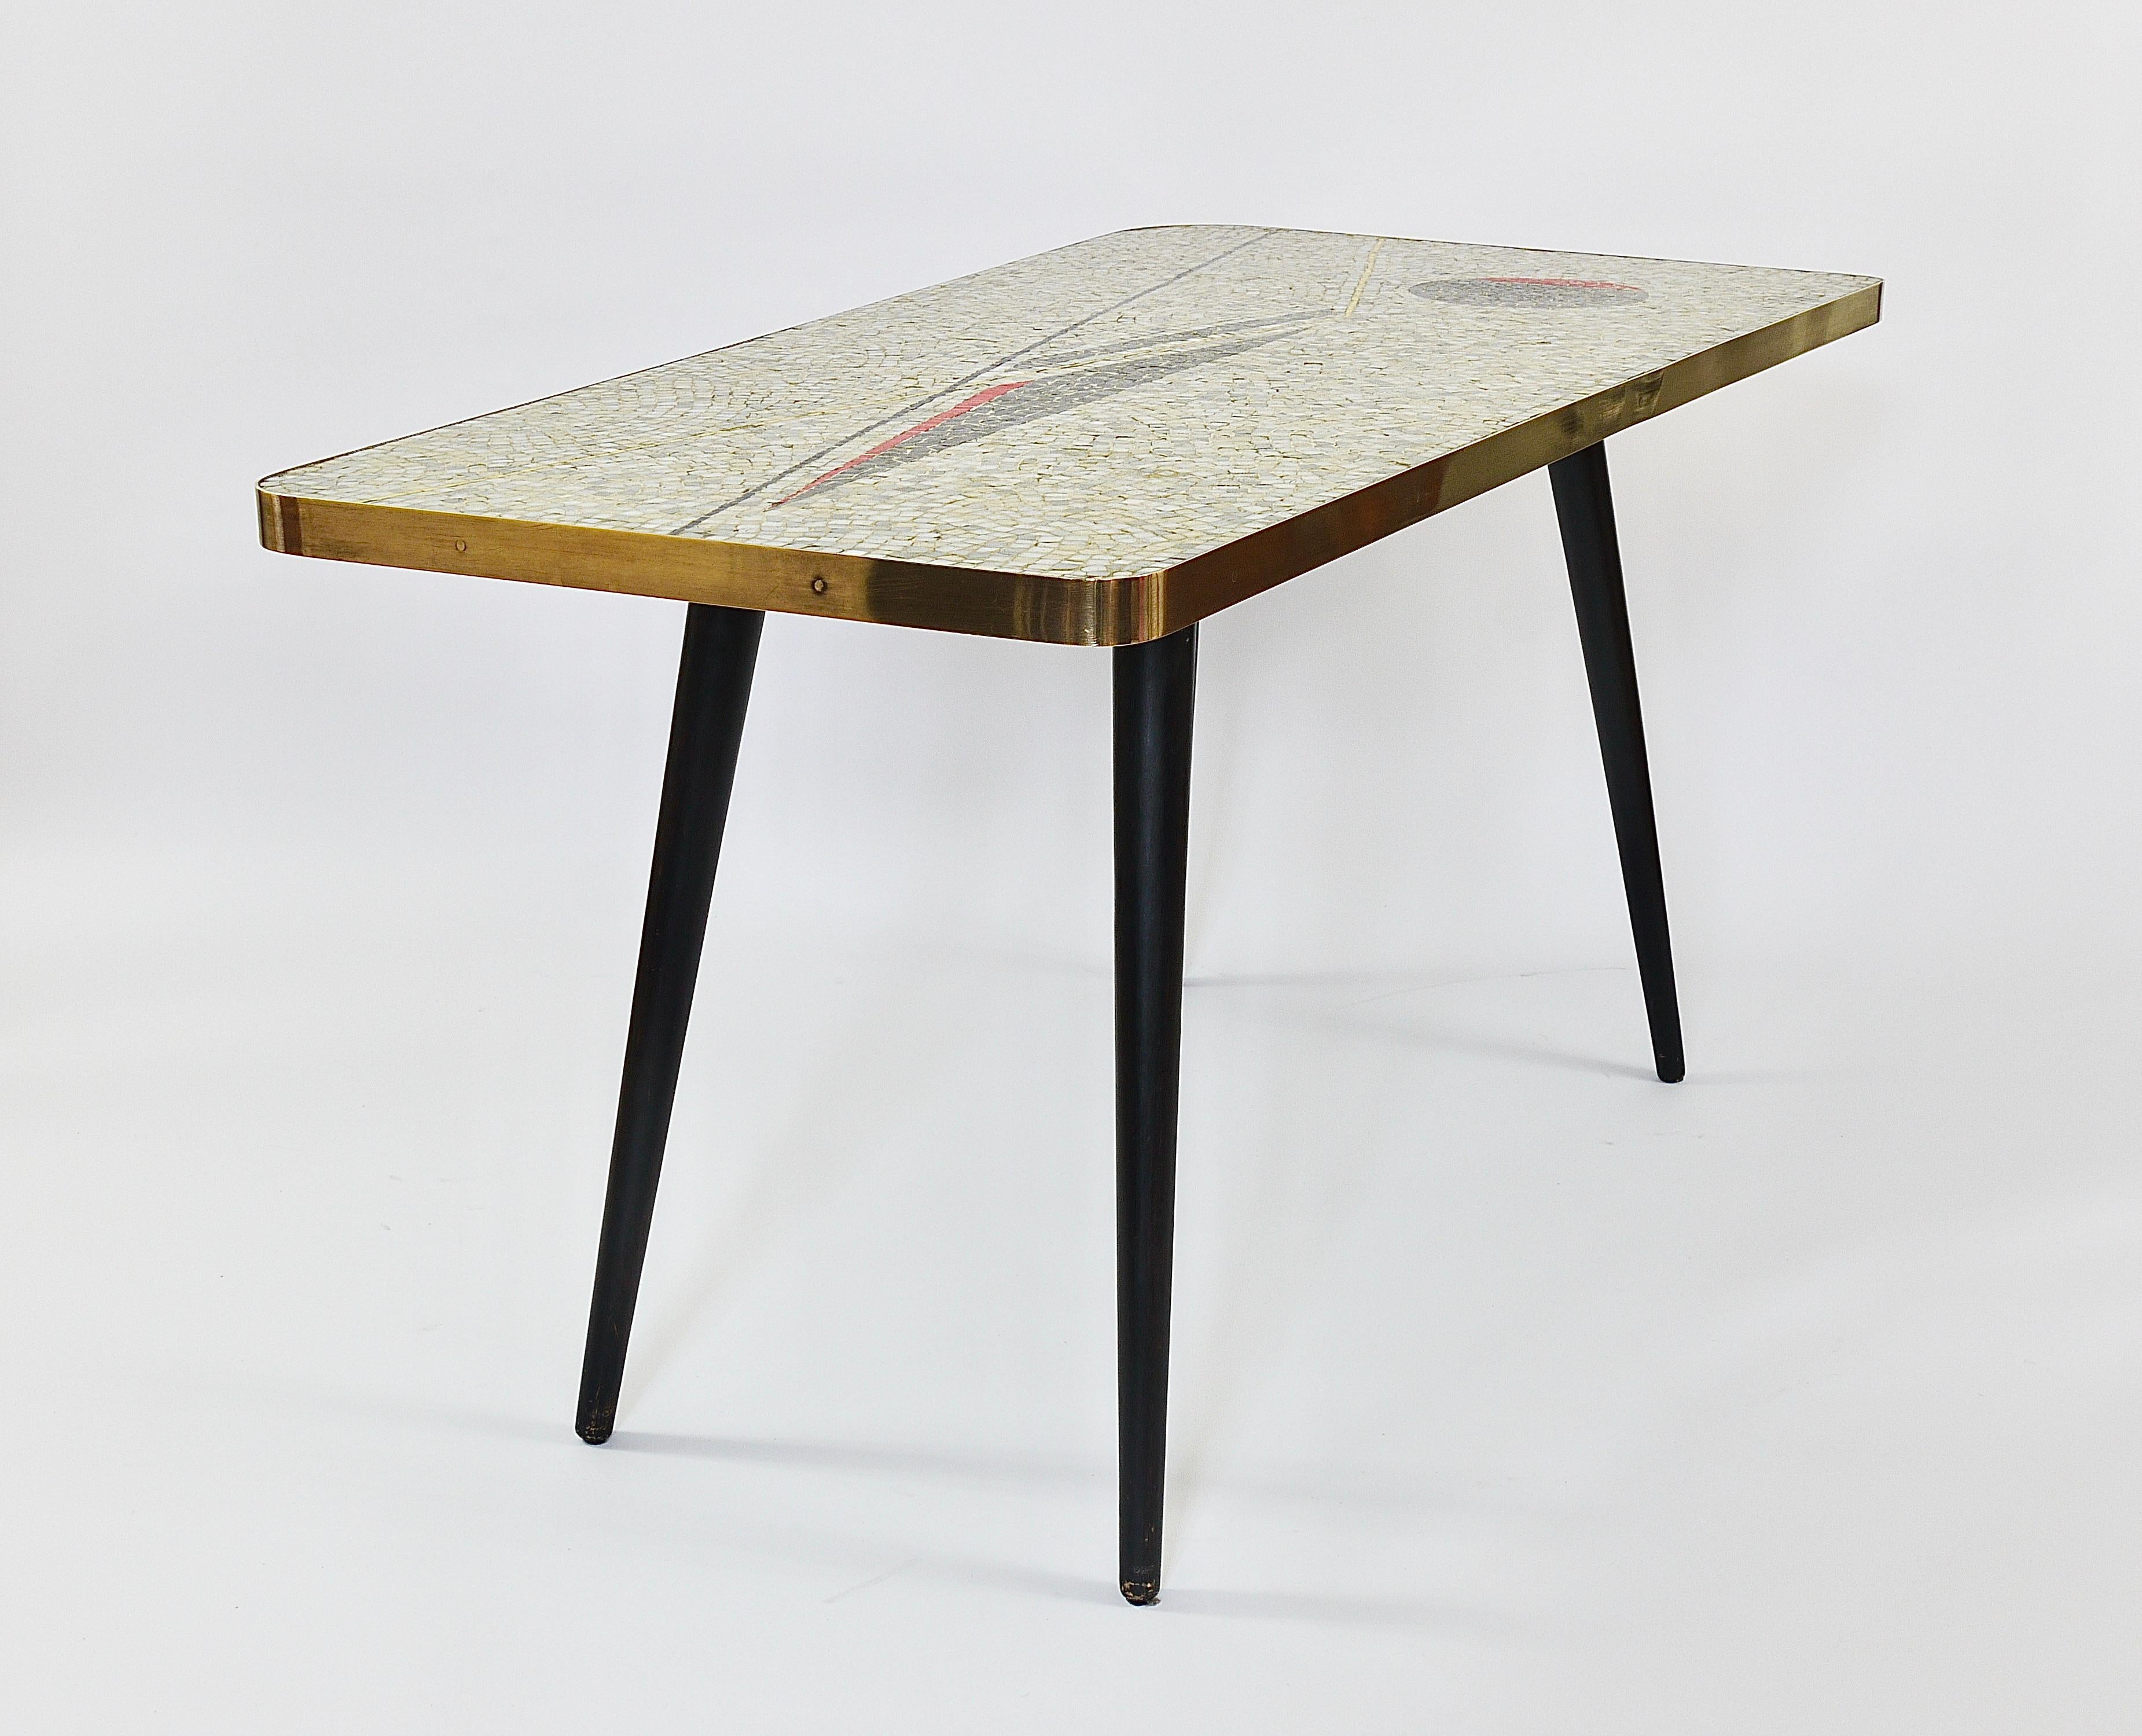 Berthold Muller Asymmetrical Mosaic Tile Coffee or Sofa Table, Germany, 1950s For Sale 9